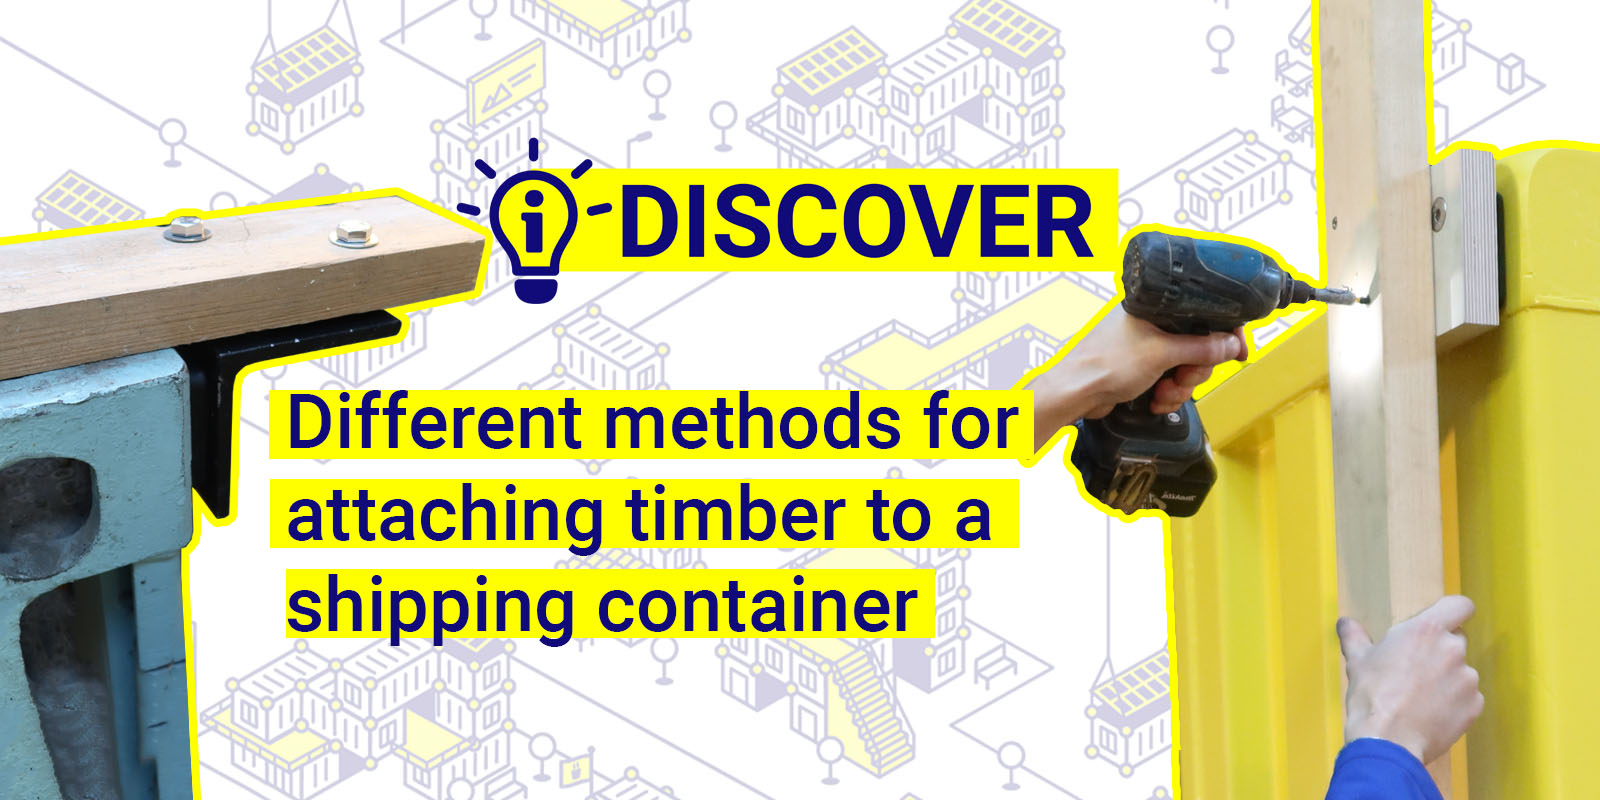 Different methods for attaching timber to a shipping container